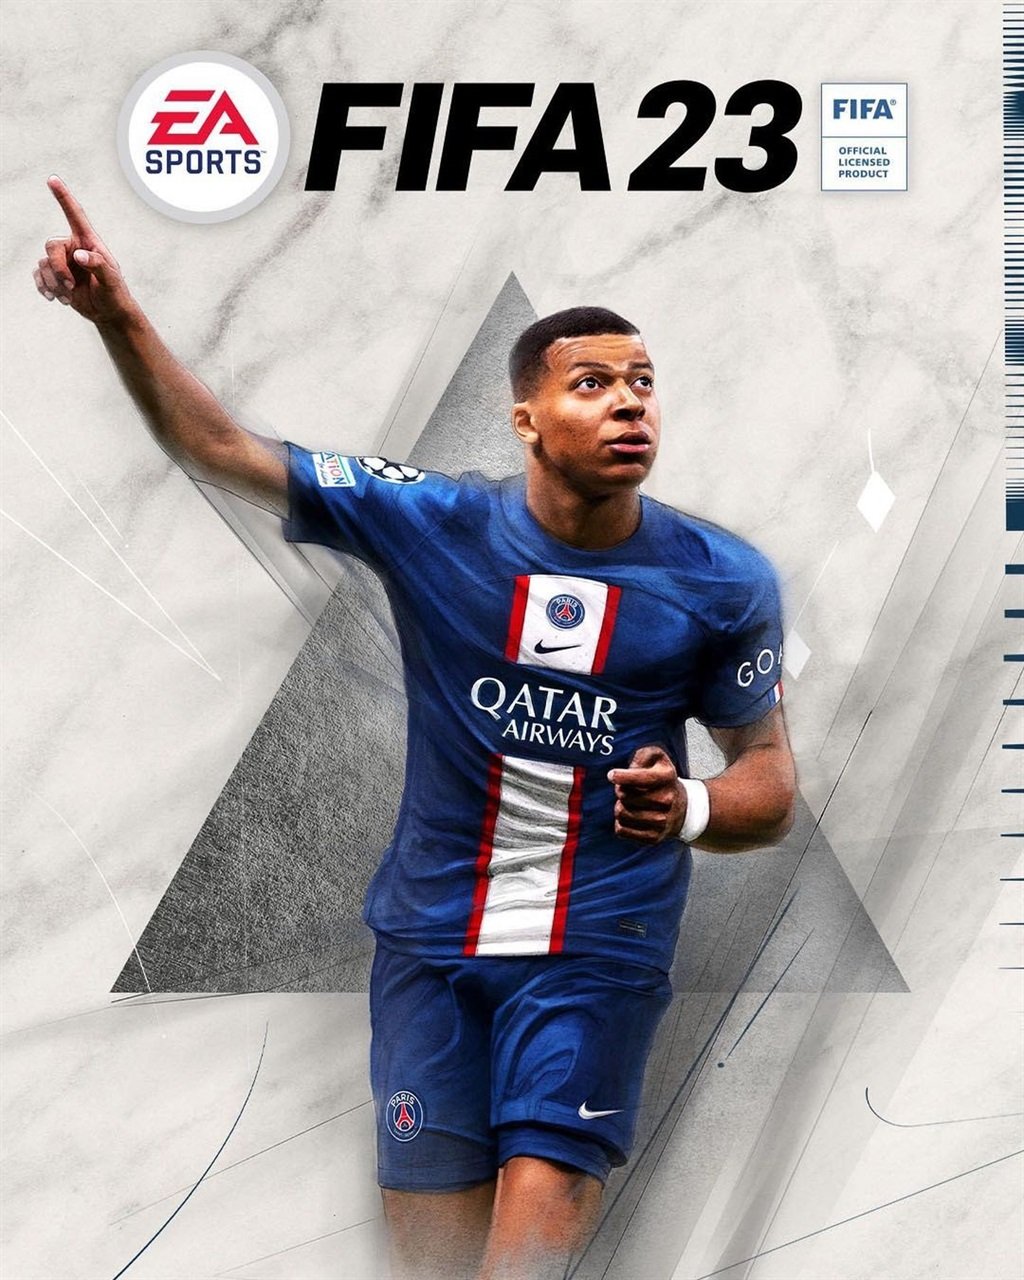 FIFA 23 Breaks Records with First Week of Launch - Gameranx